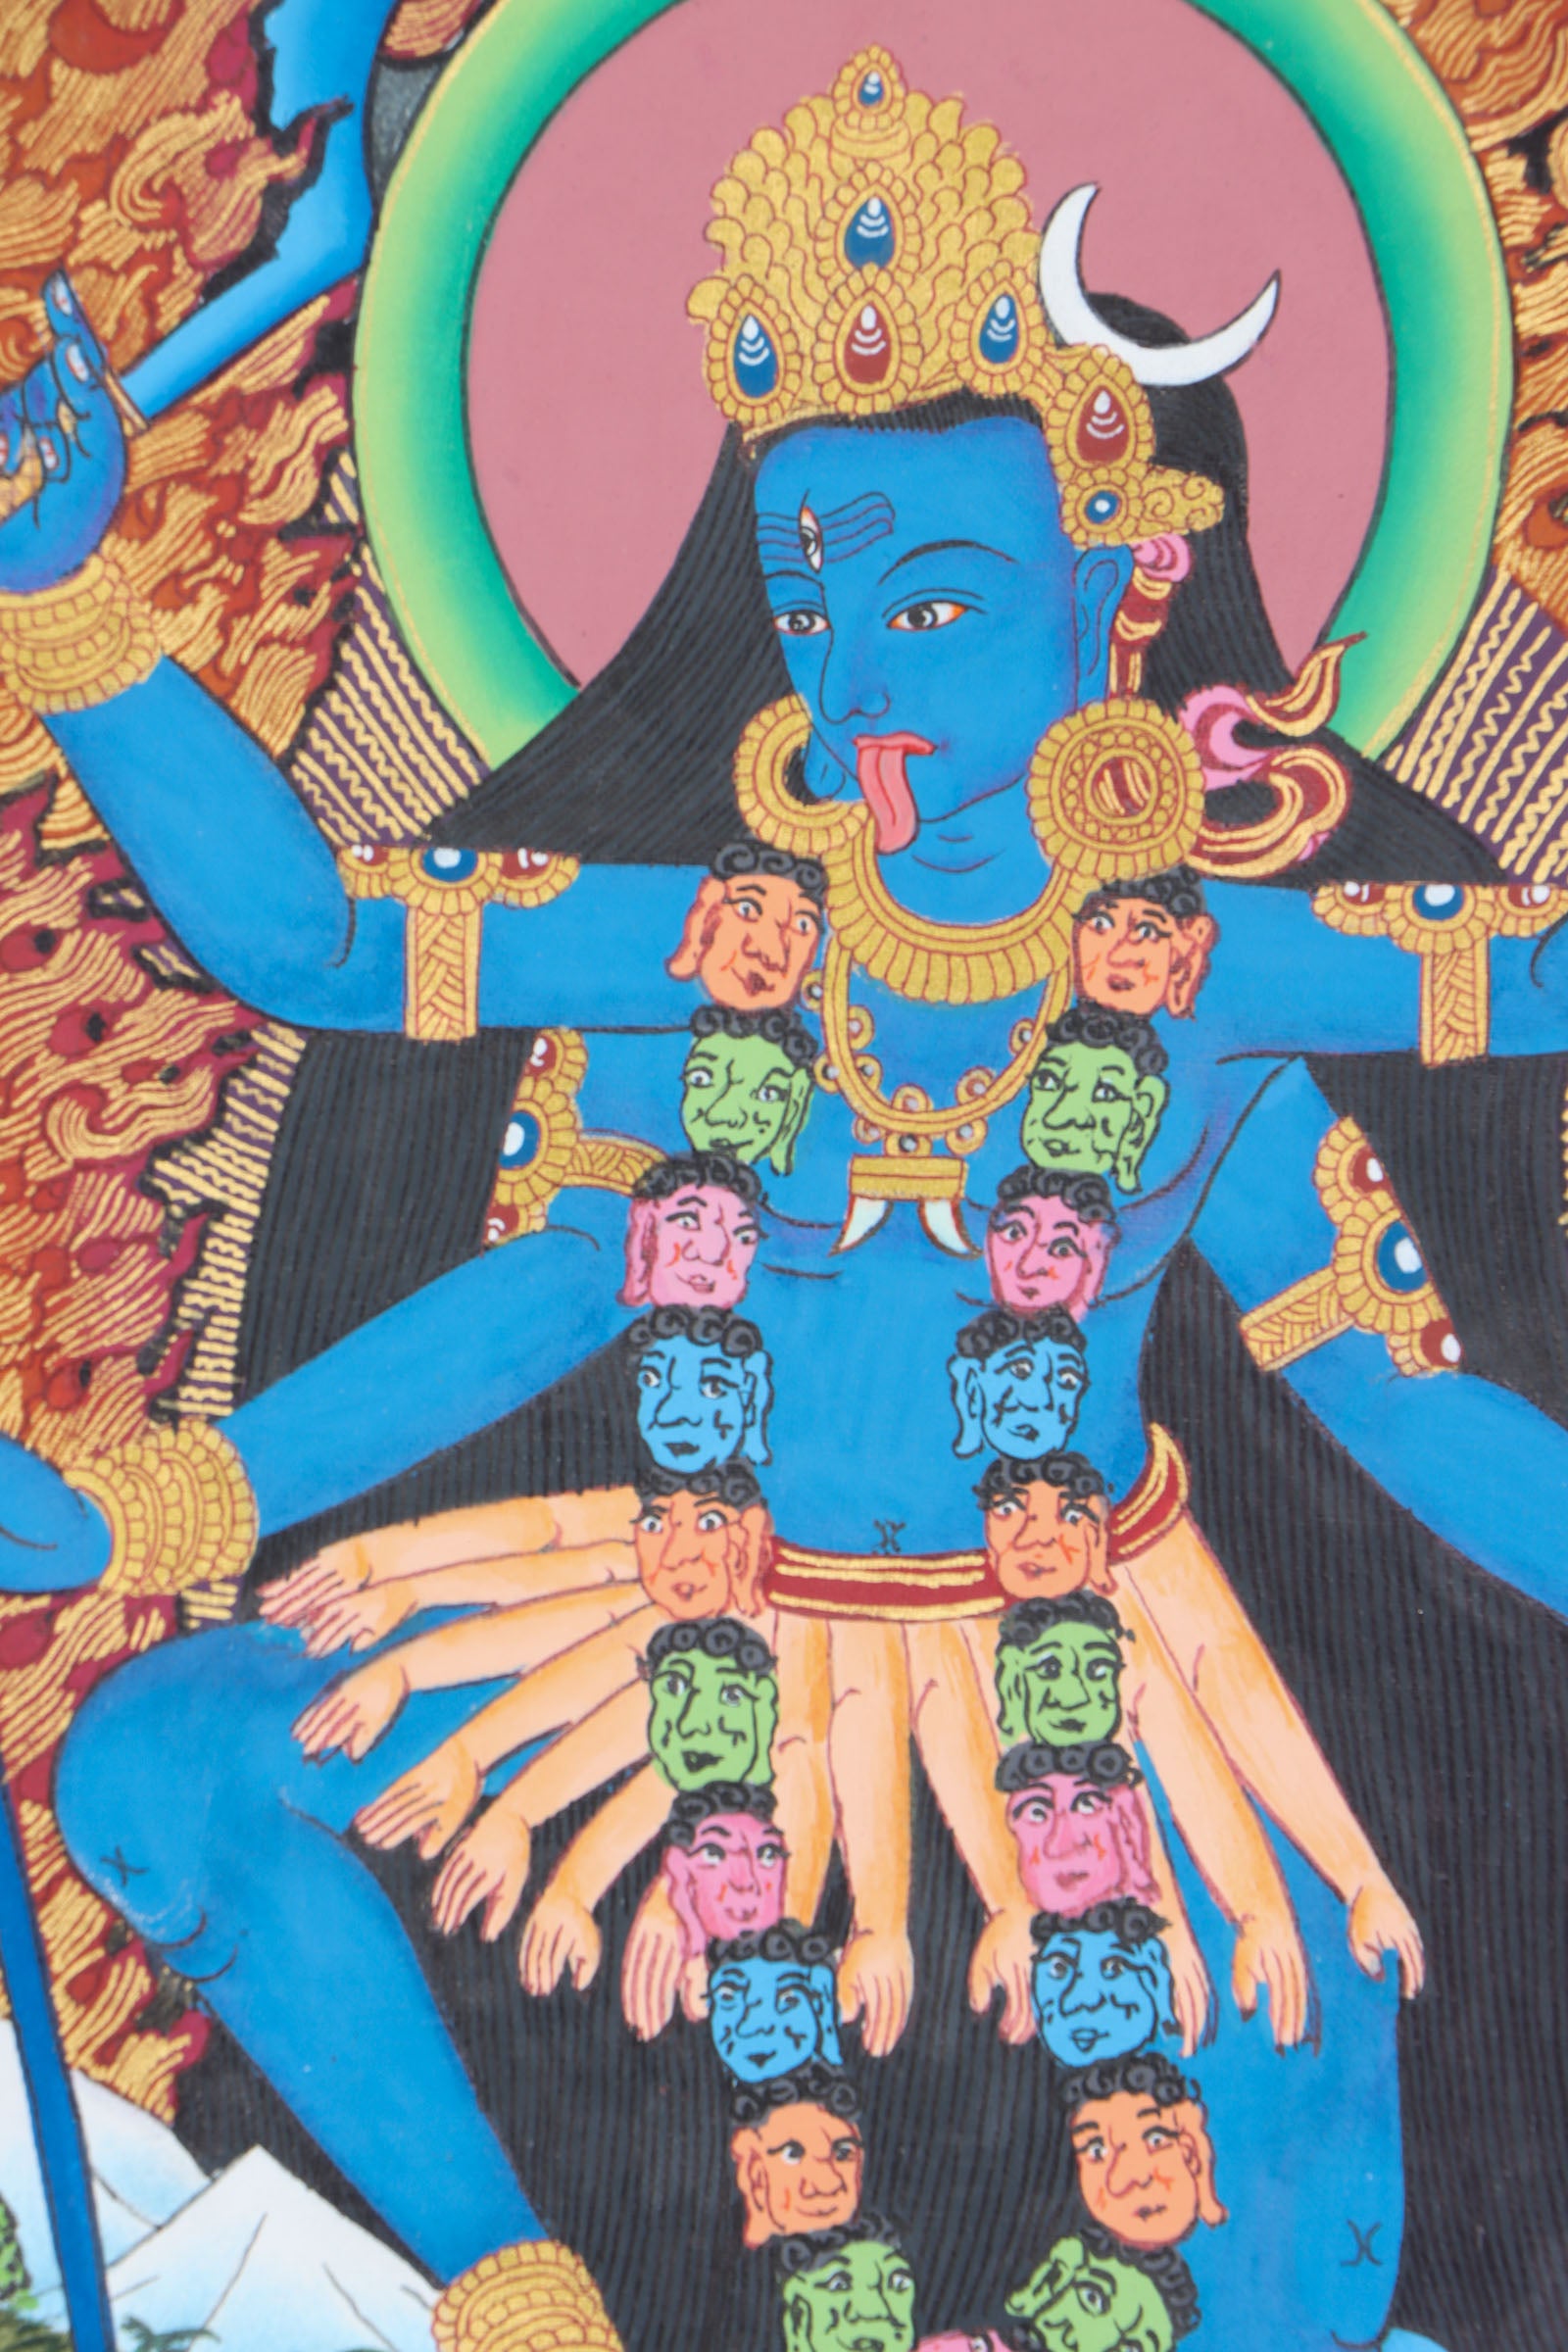 Kali Thangka is a visual tools for spiritual practice, meditation and devotion.